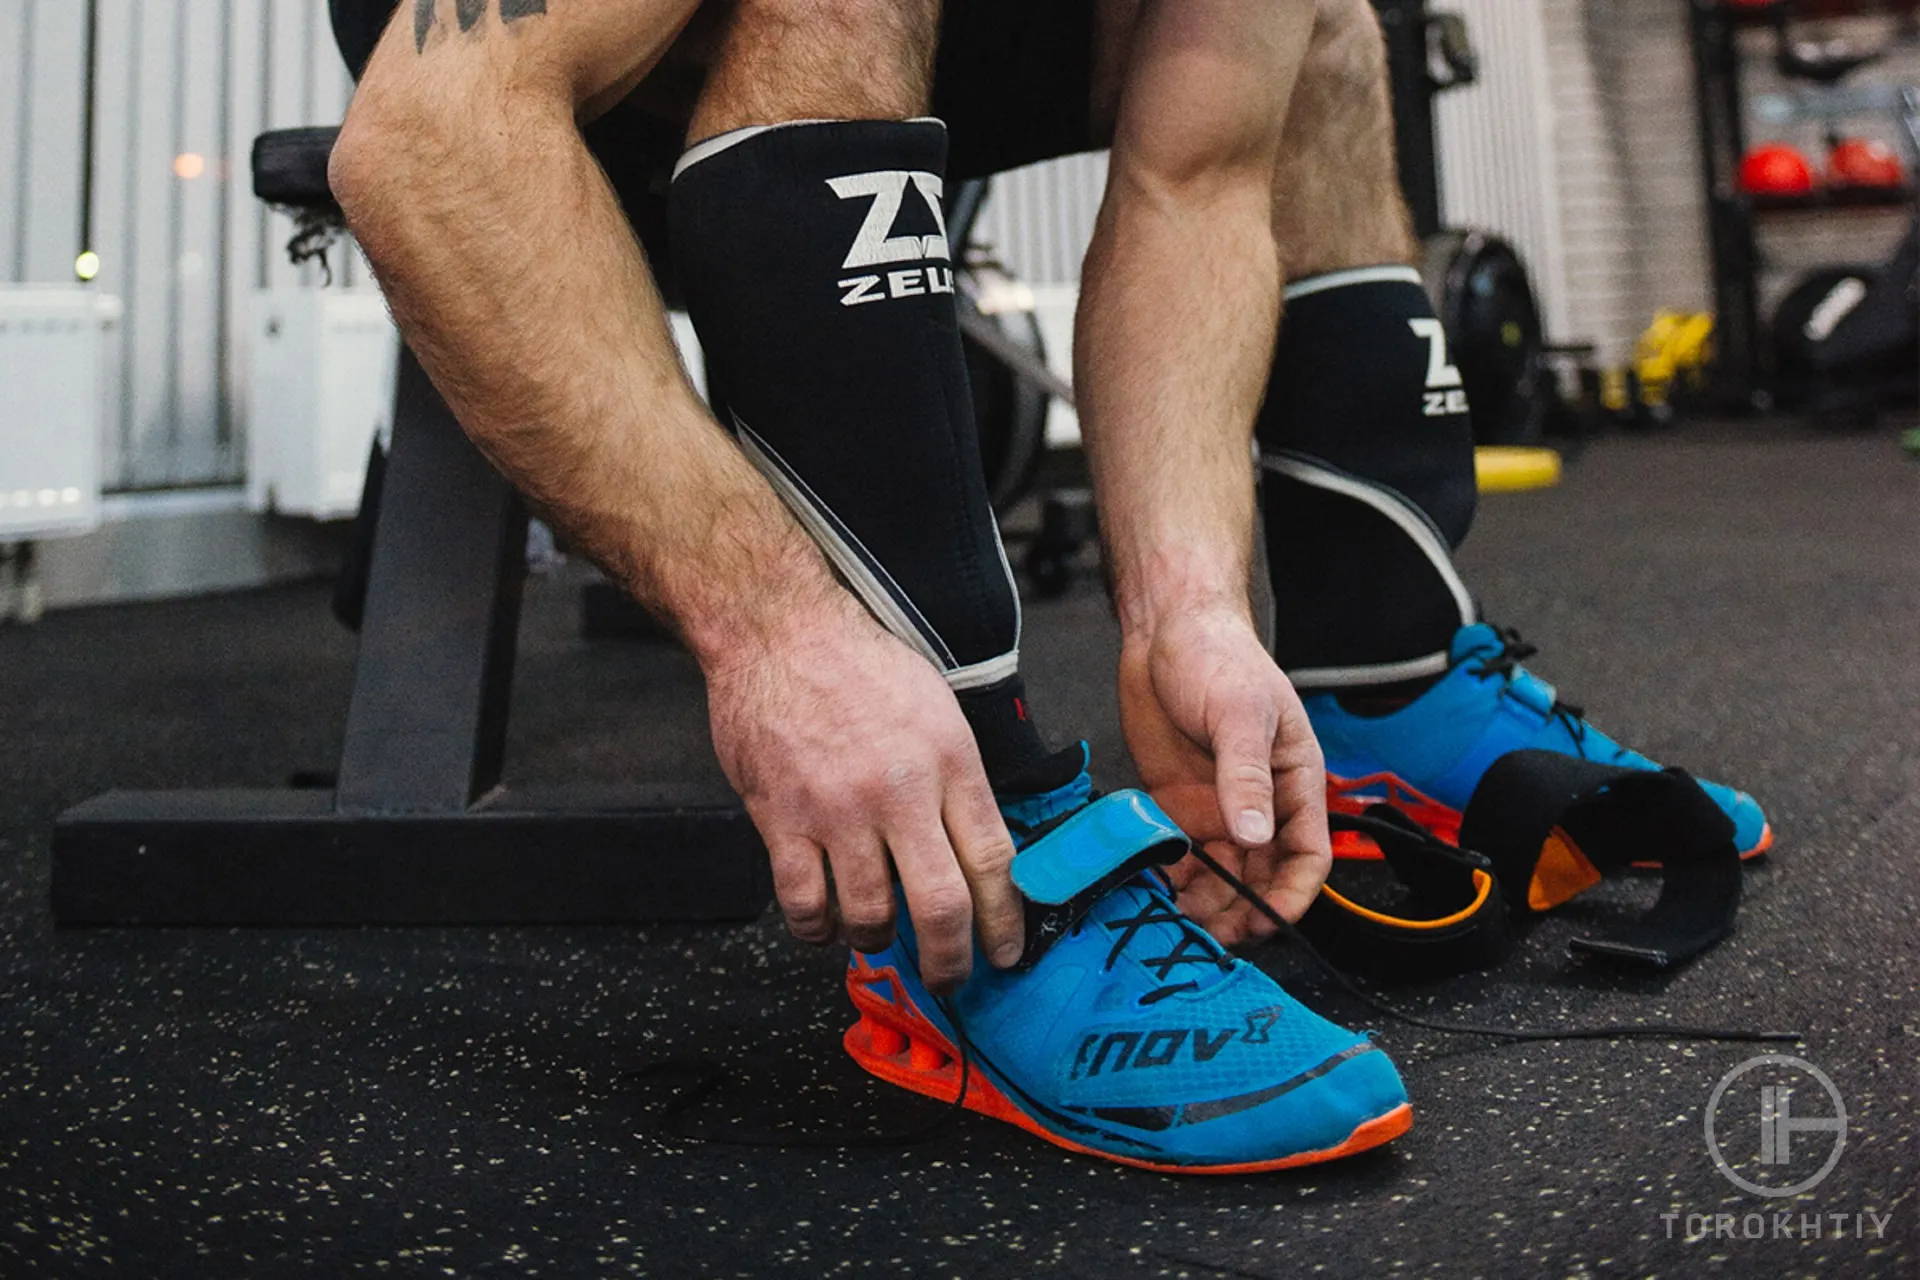 athlete is prepearing shoes for training